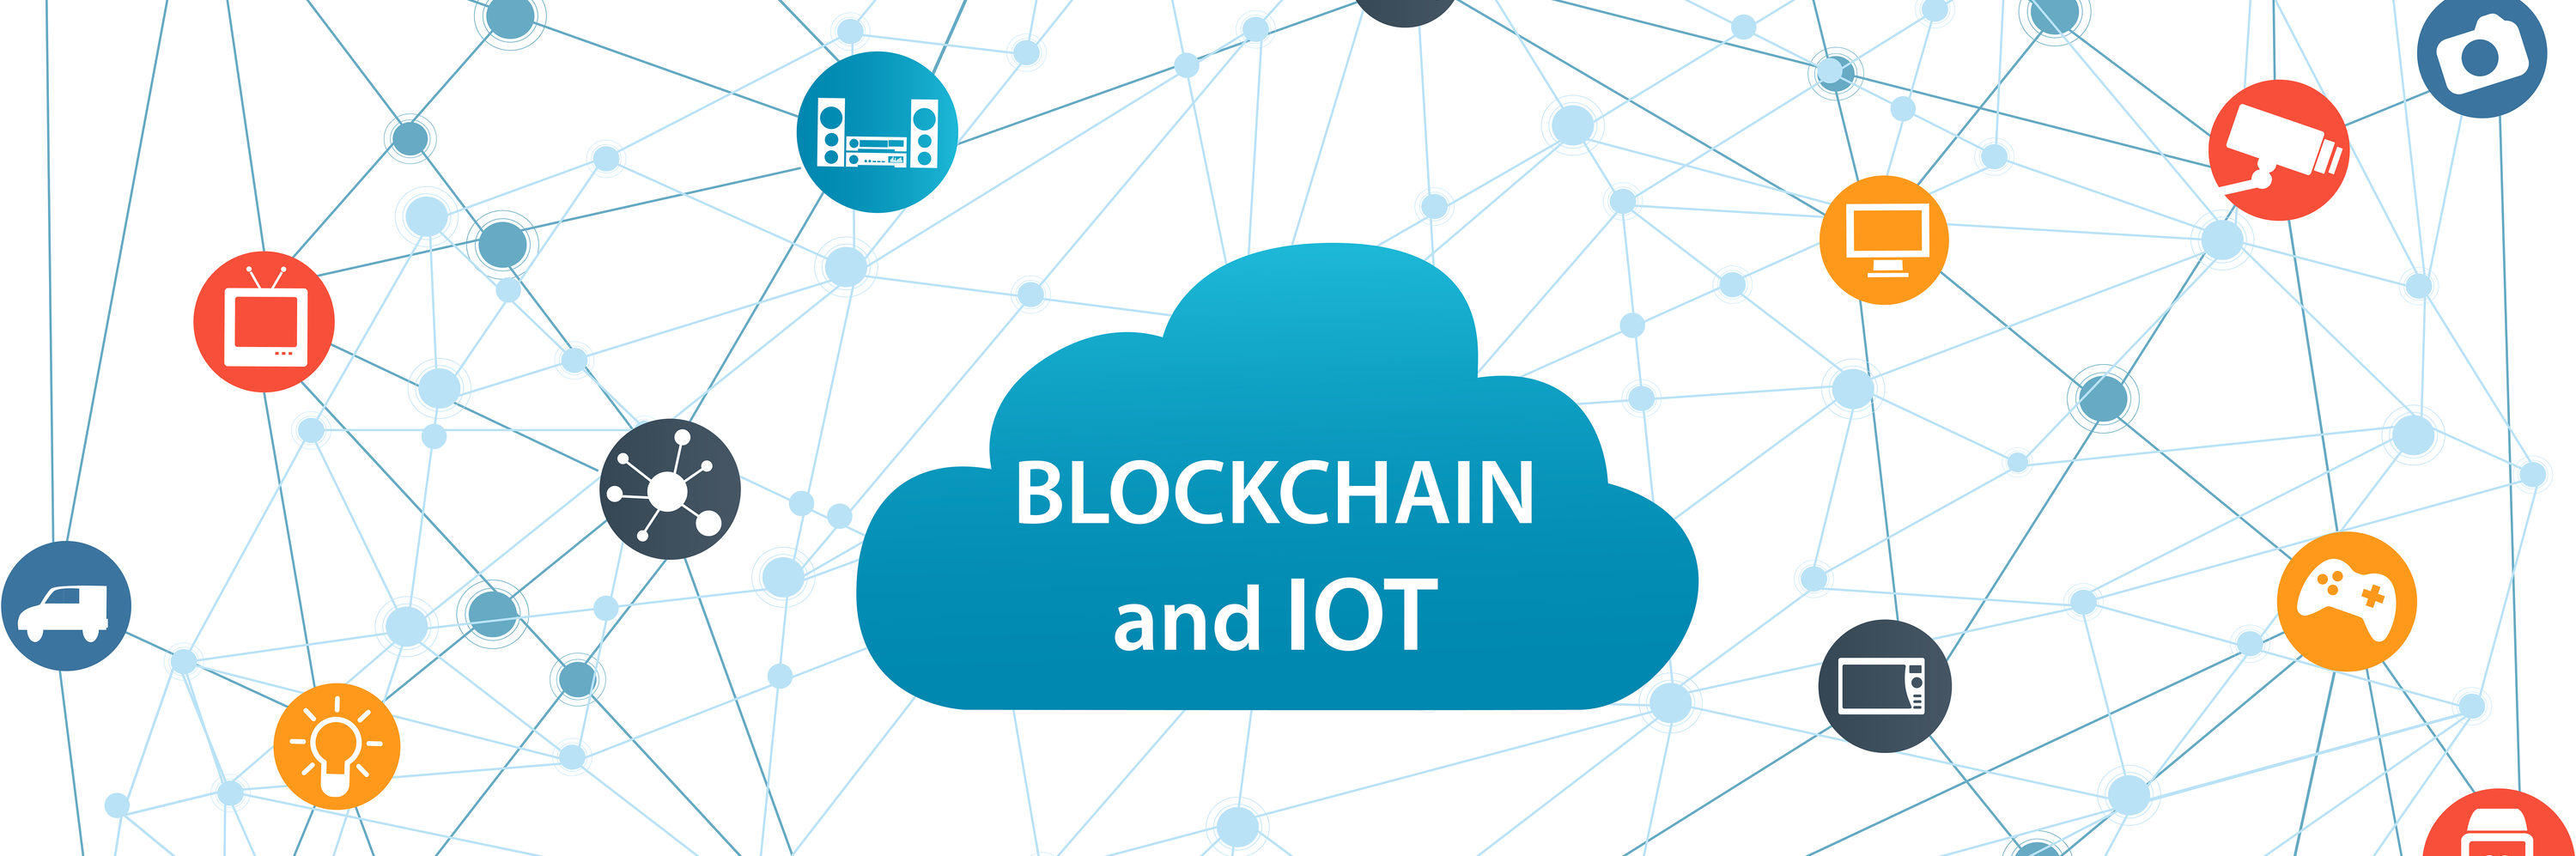 blockchain technology for iot internet of things devices blockchain ledge iot applications iot uses of blockchain